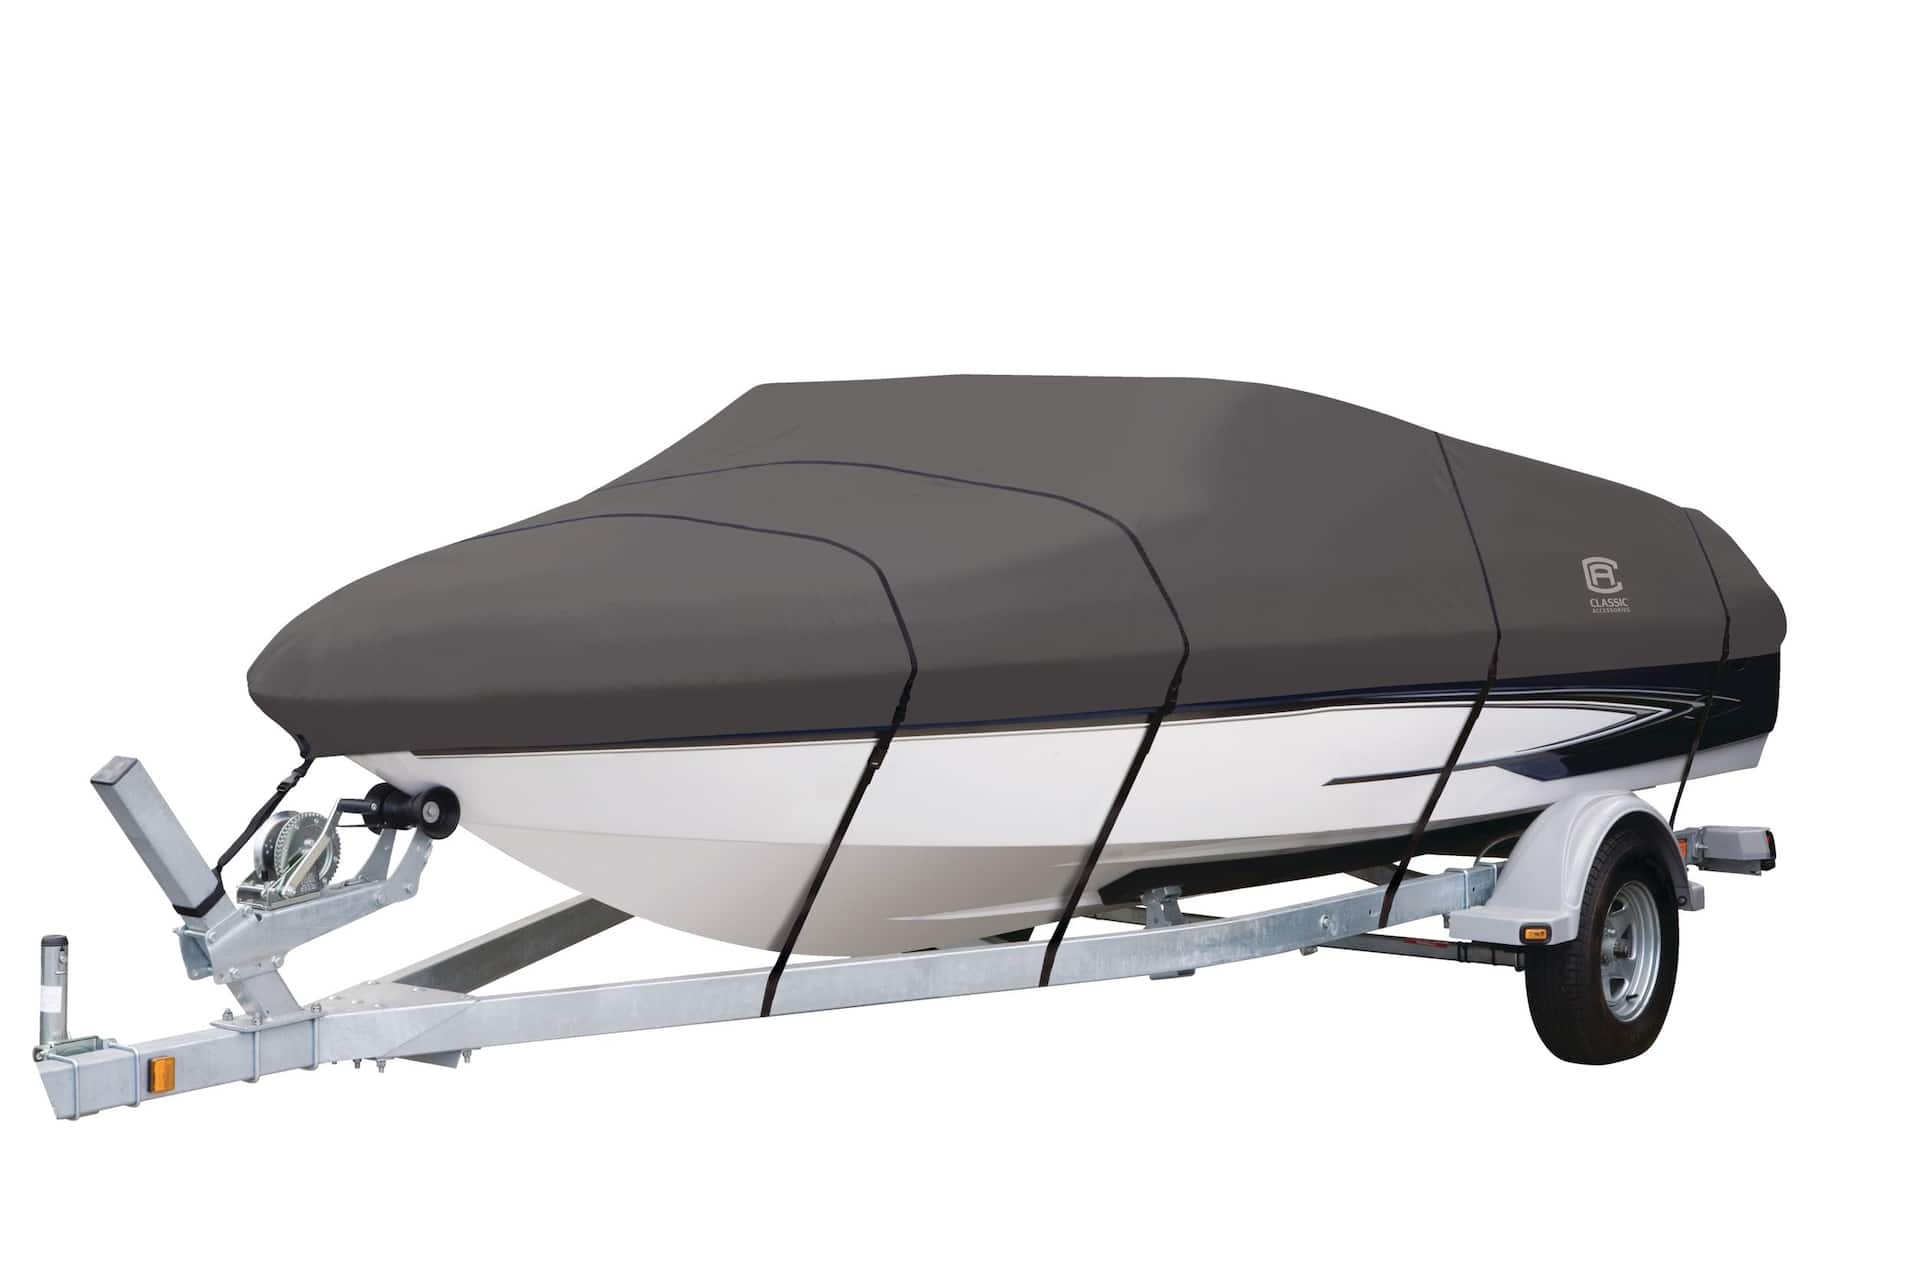 Classic Accessories Northern Lakes XT Heavy-Duty Fabric Boat Cover,  Assorted Sizes